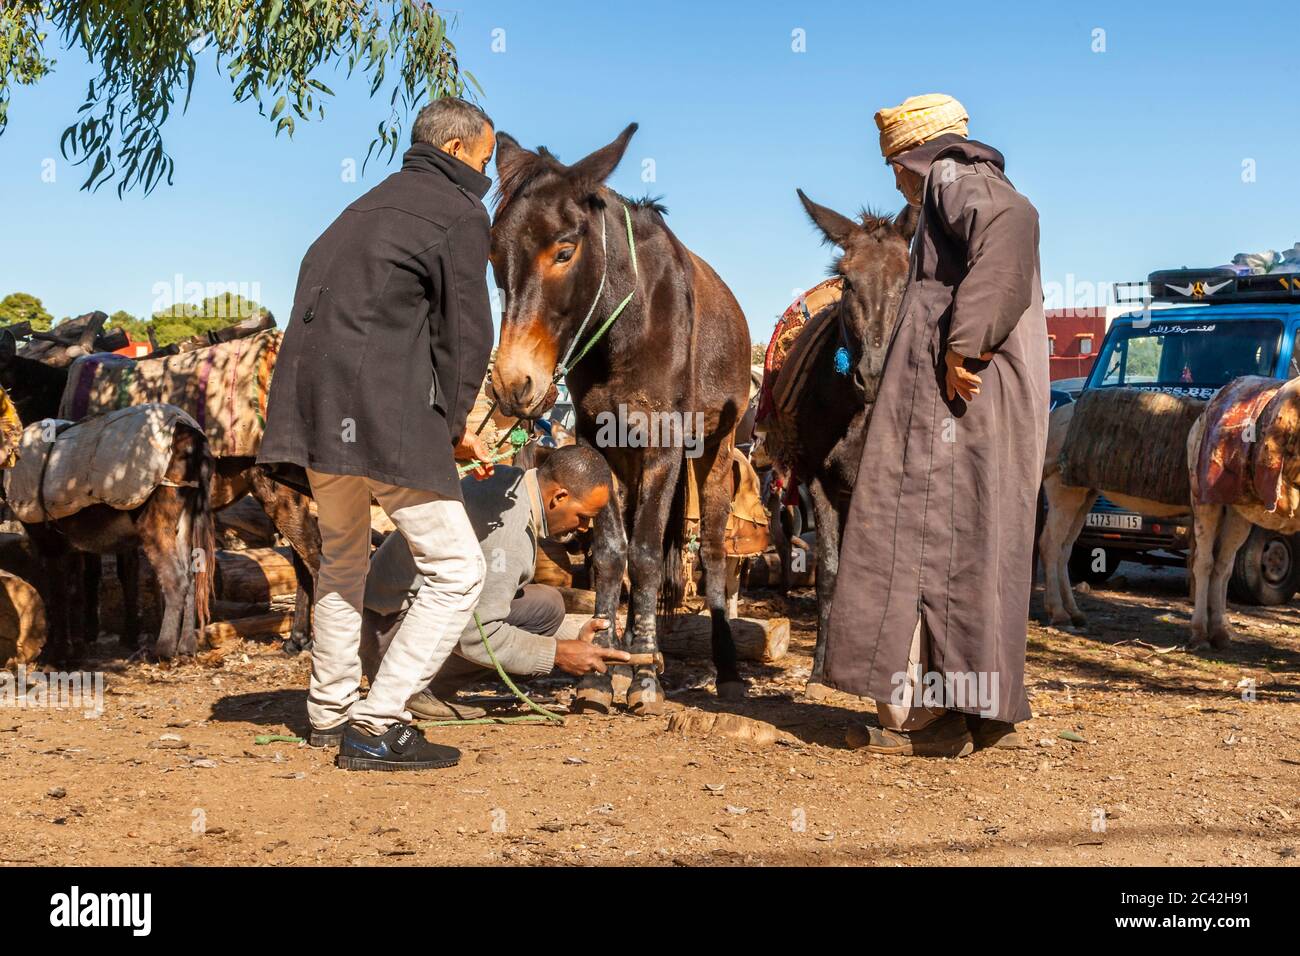 Impressions of Morocco: Donkey at the farrier's Stock Photo